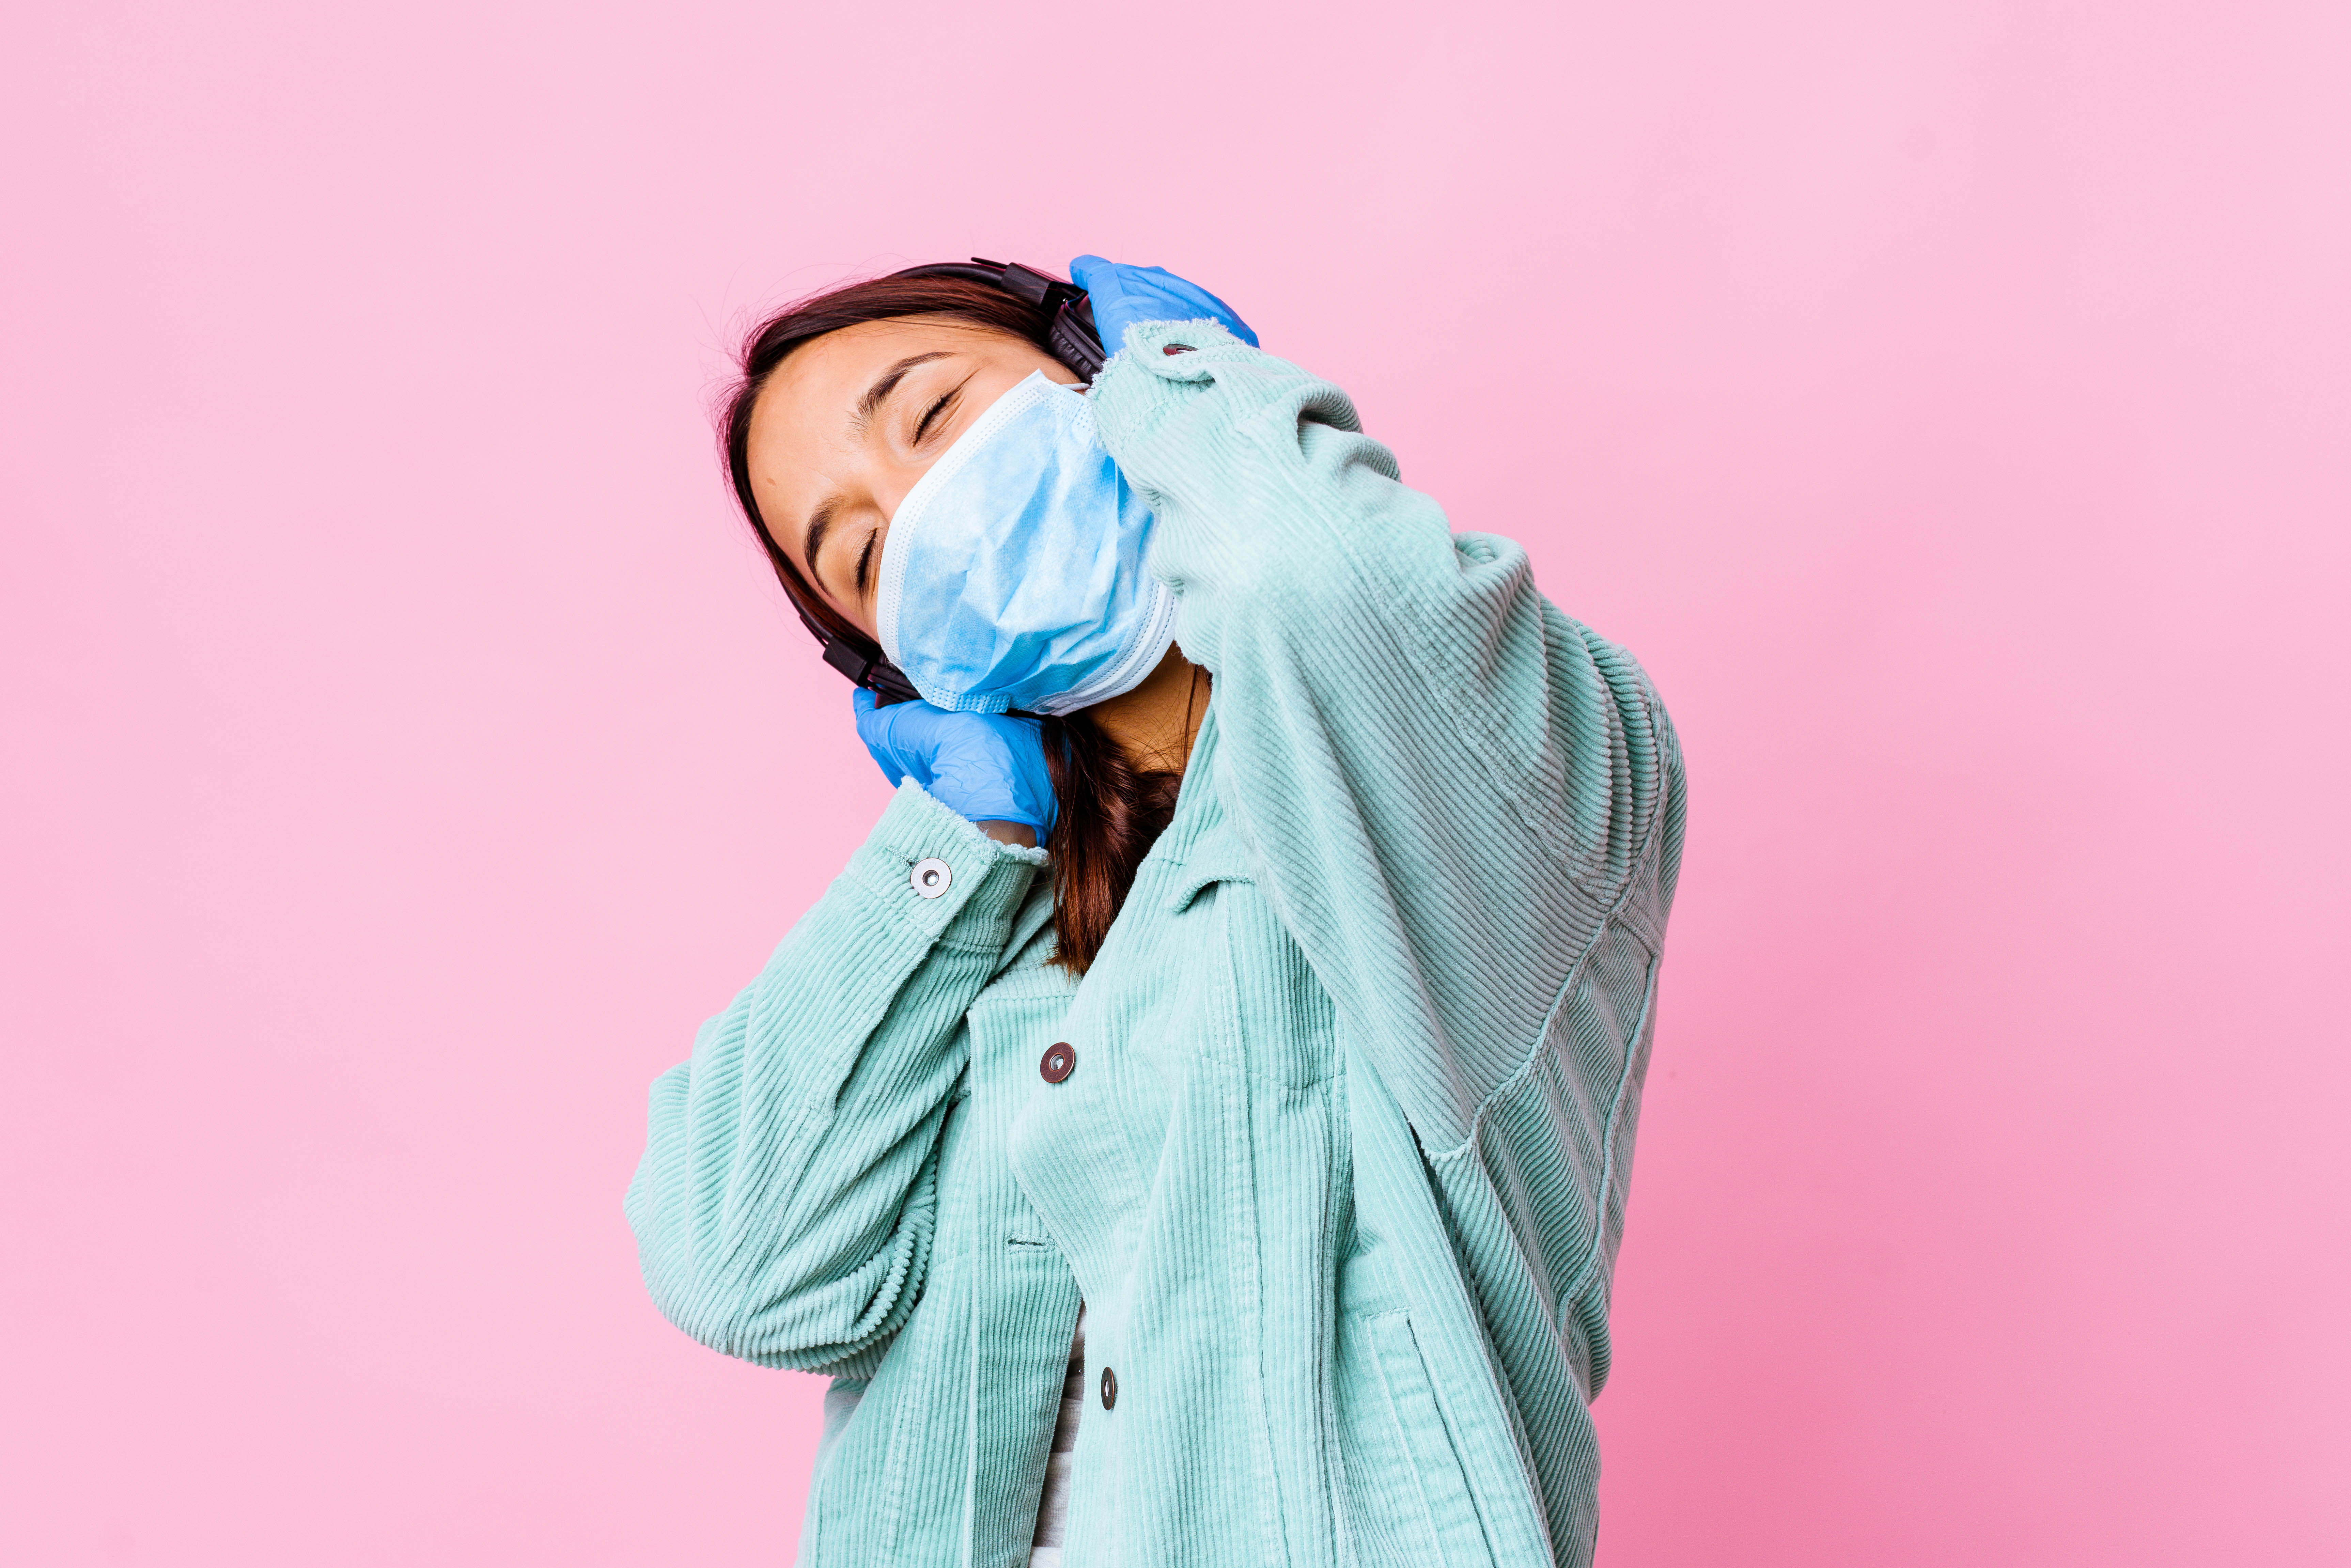 Nurse in surgical mask listening to headphones